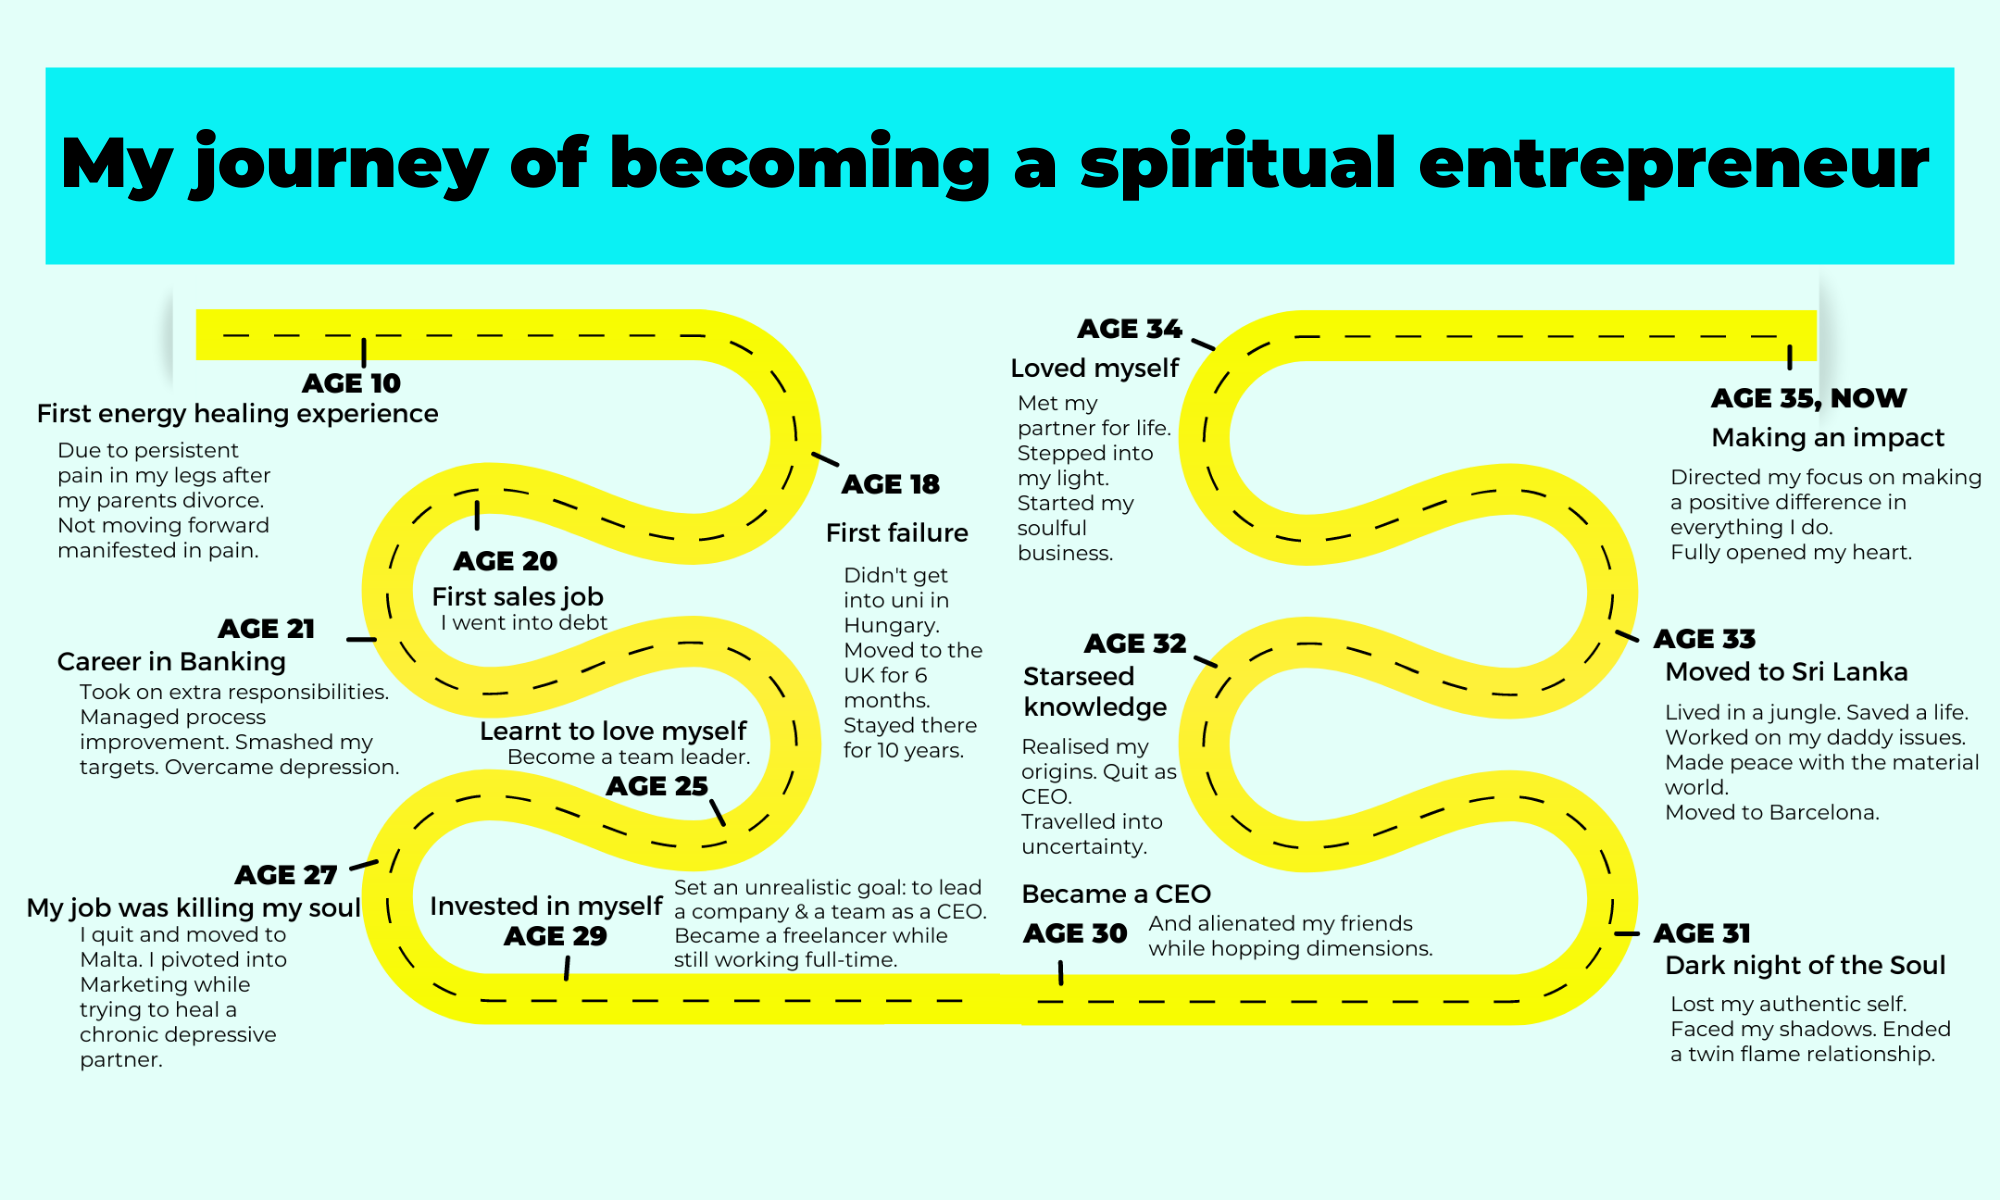 My journey of becoming a spiritual entrepreneur